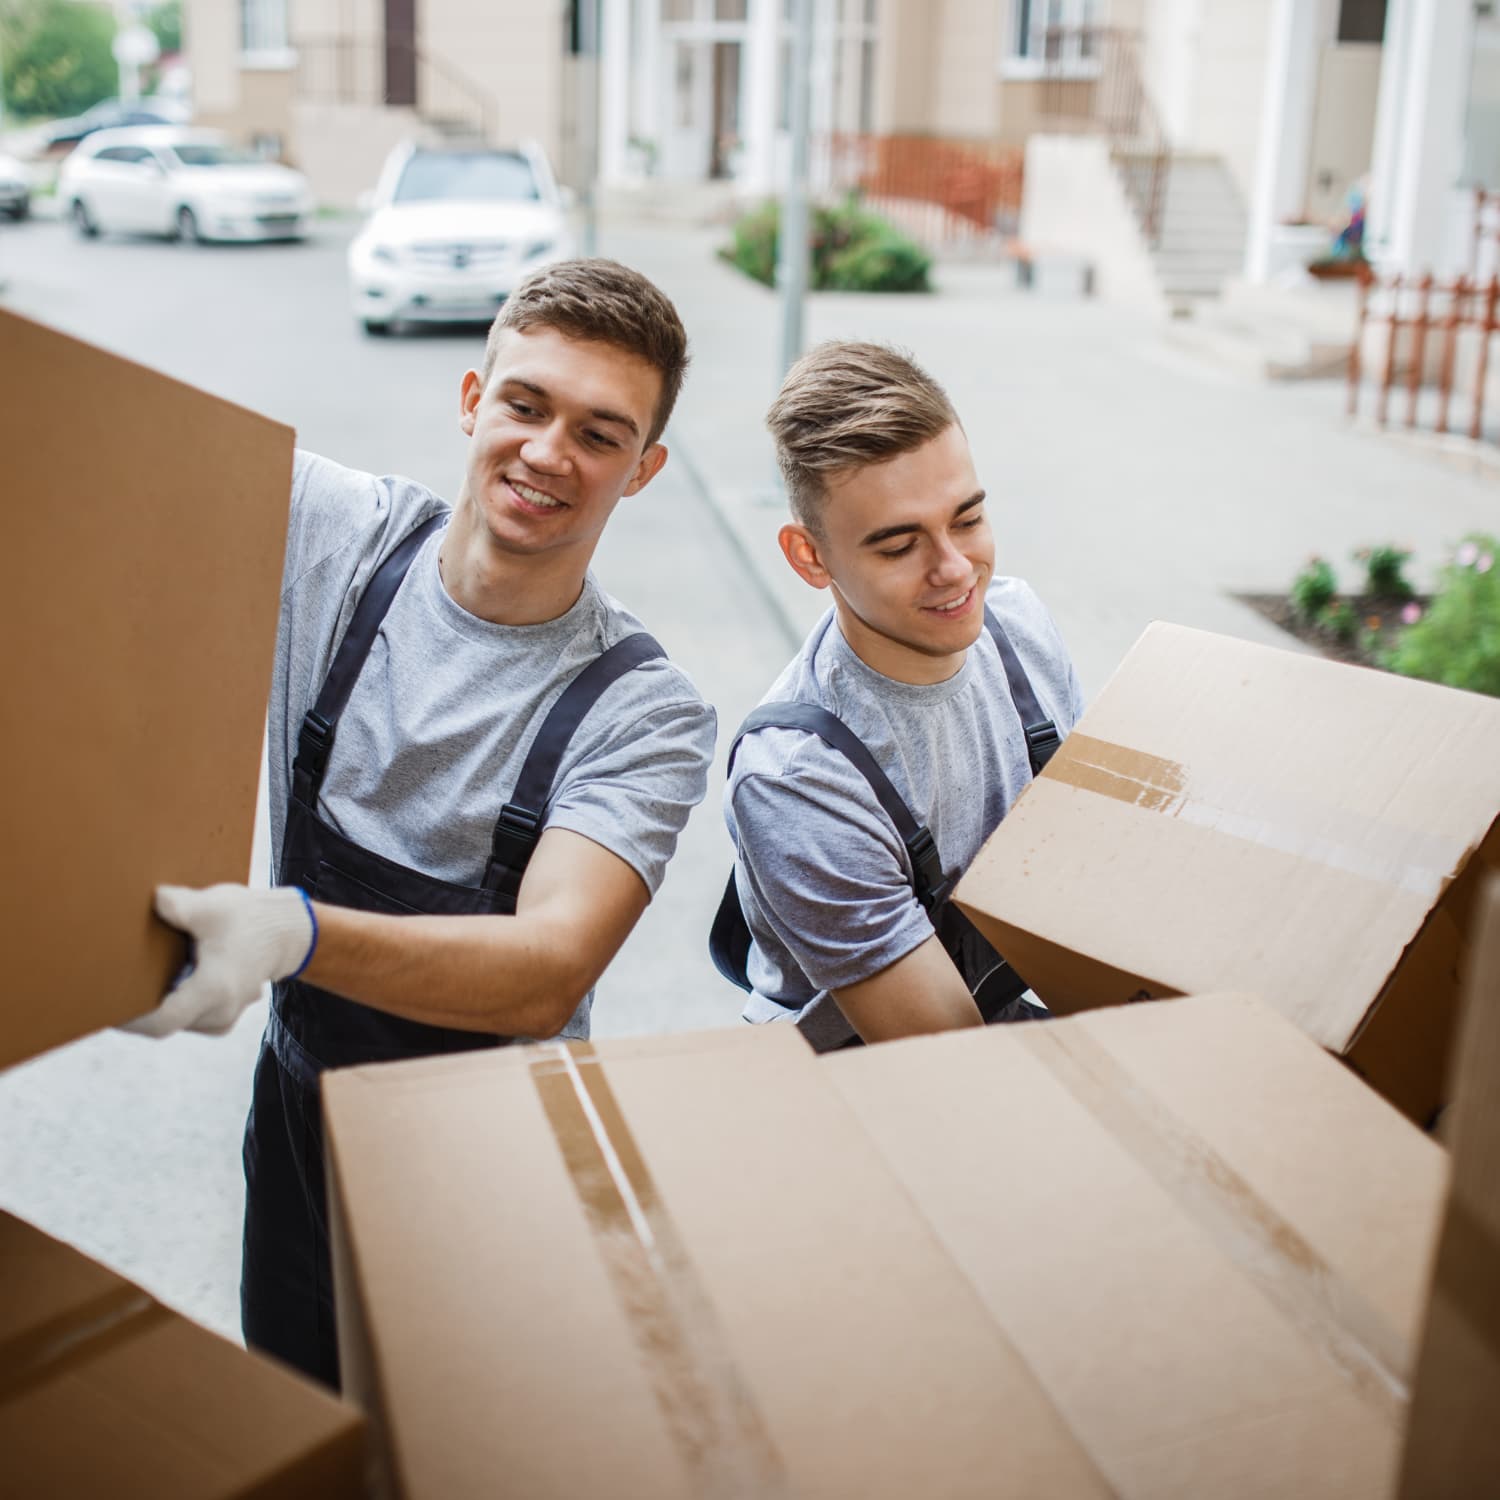 Qualities to Look for in Commercial Moving Companies in Washington, D.C., Alexandria, VA, & Surrounding Areas